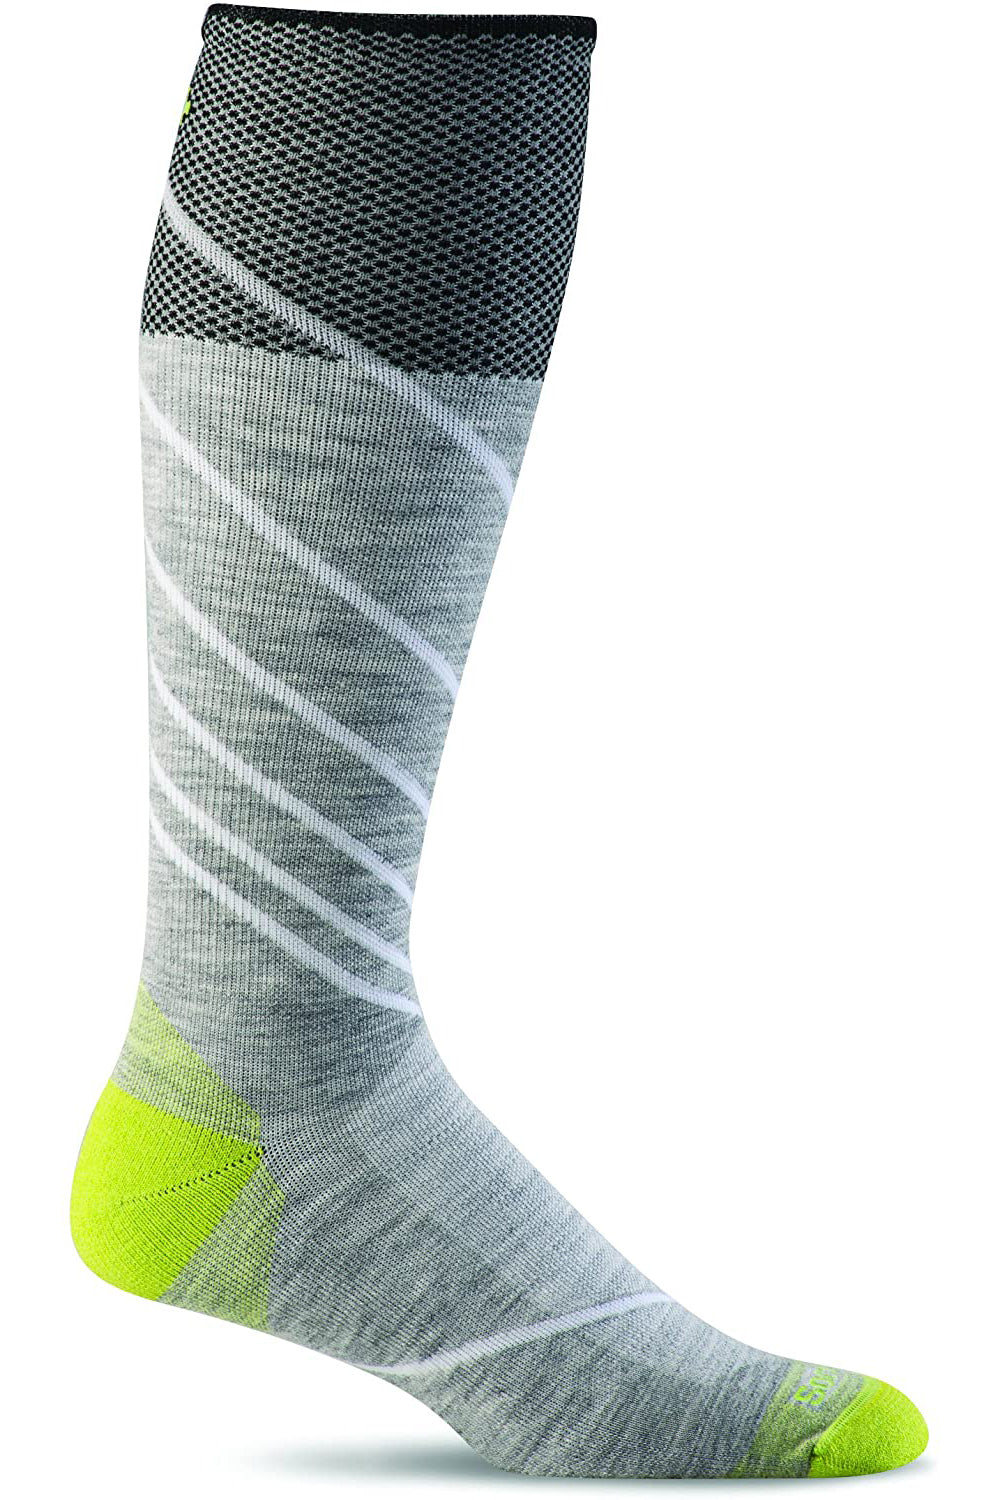 Sockwell Men's Pulse Sock in Grey color from the side